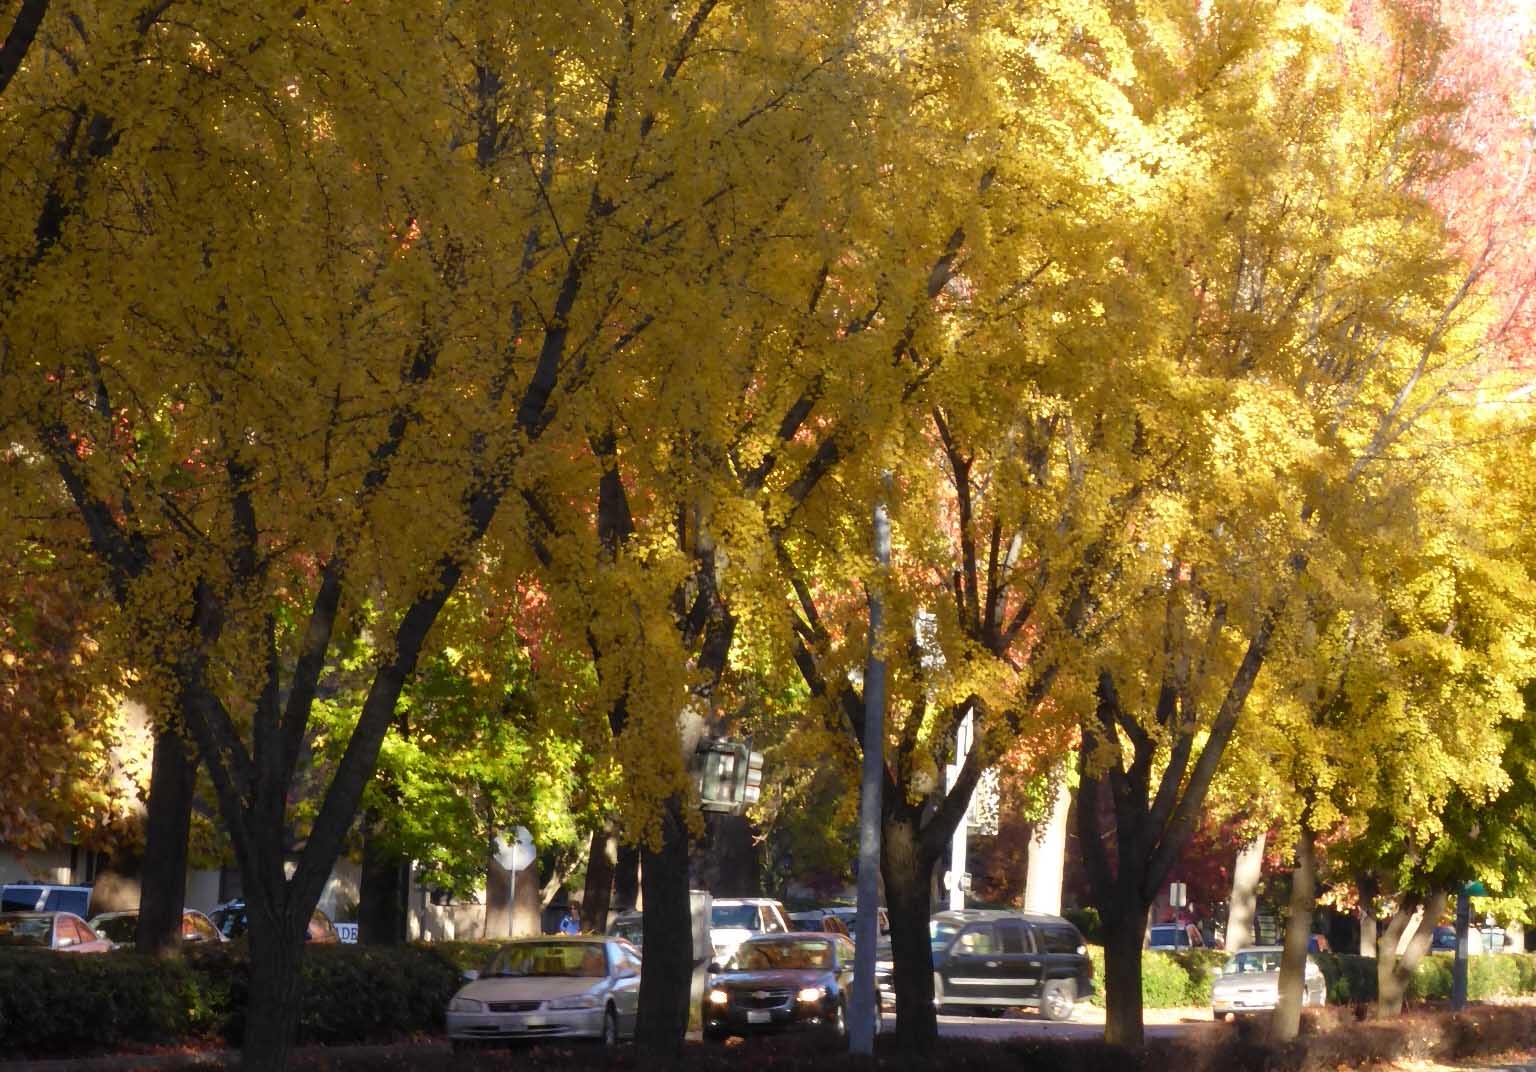 Street lined with trees in fall colors.